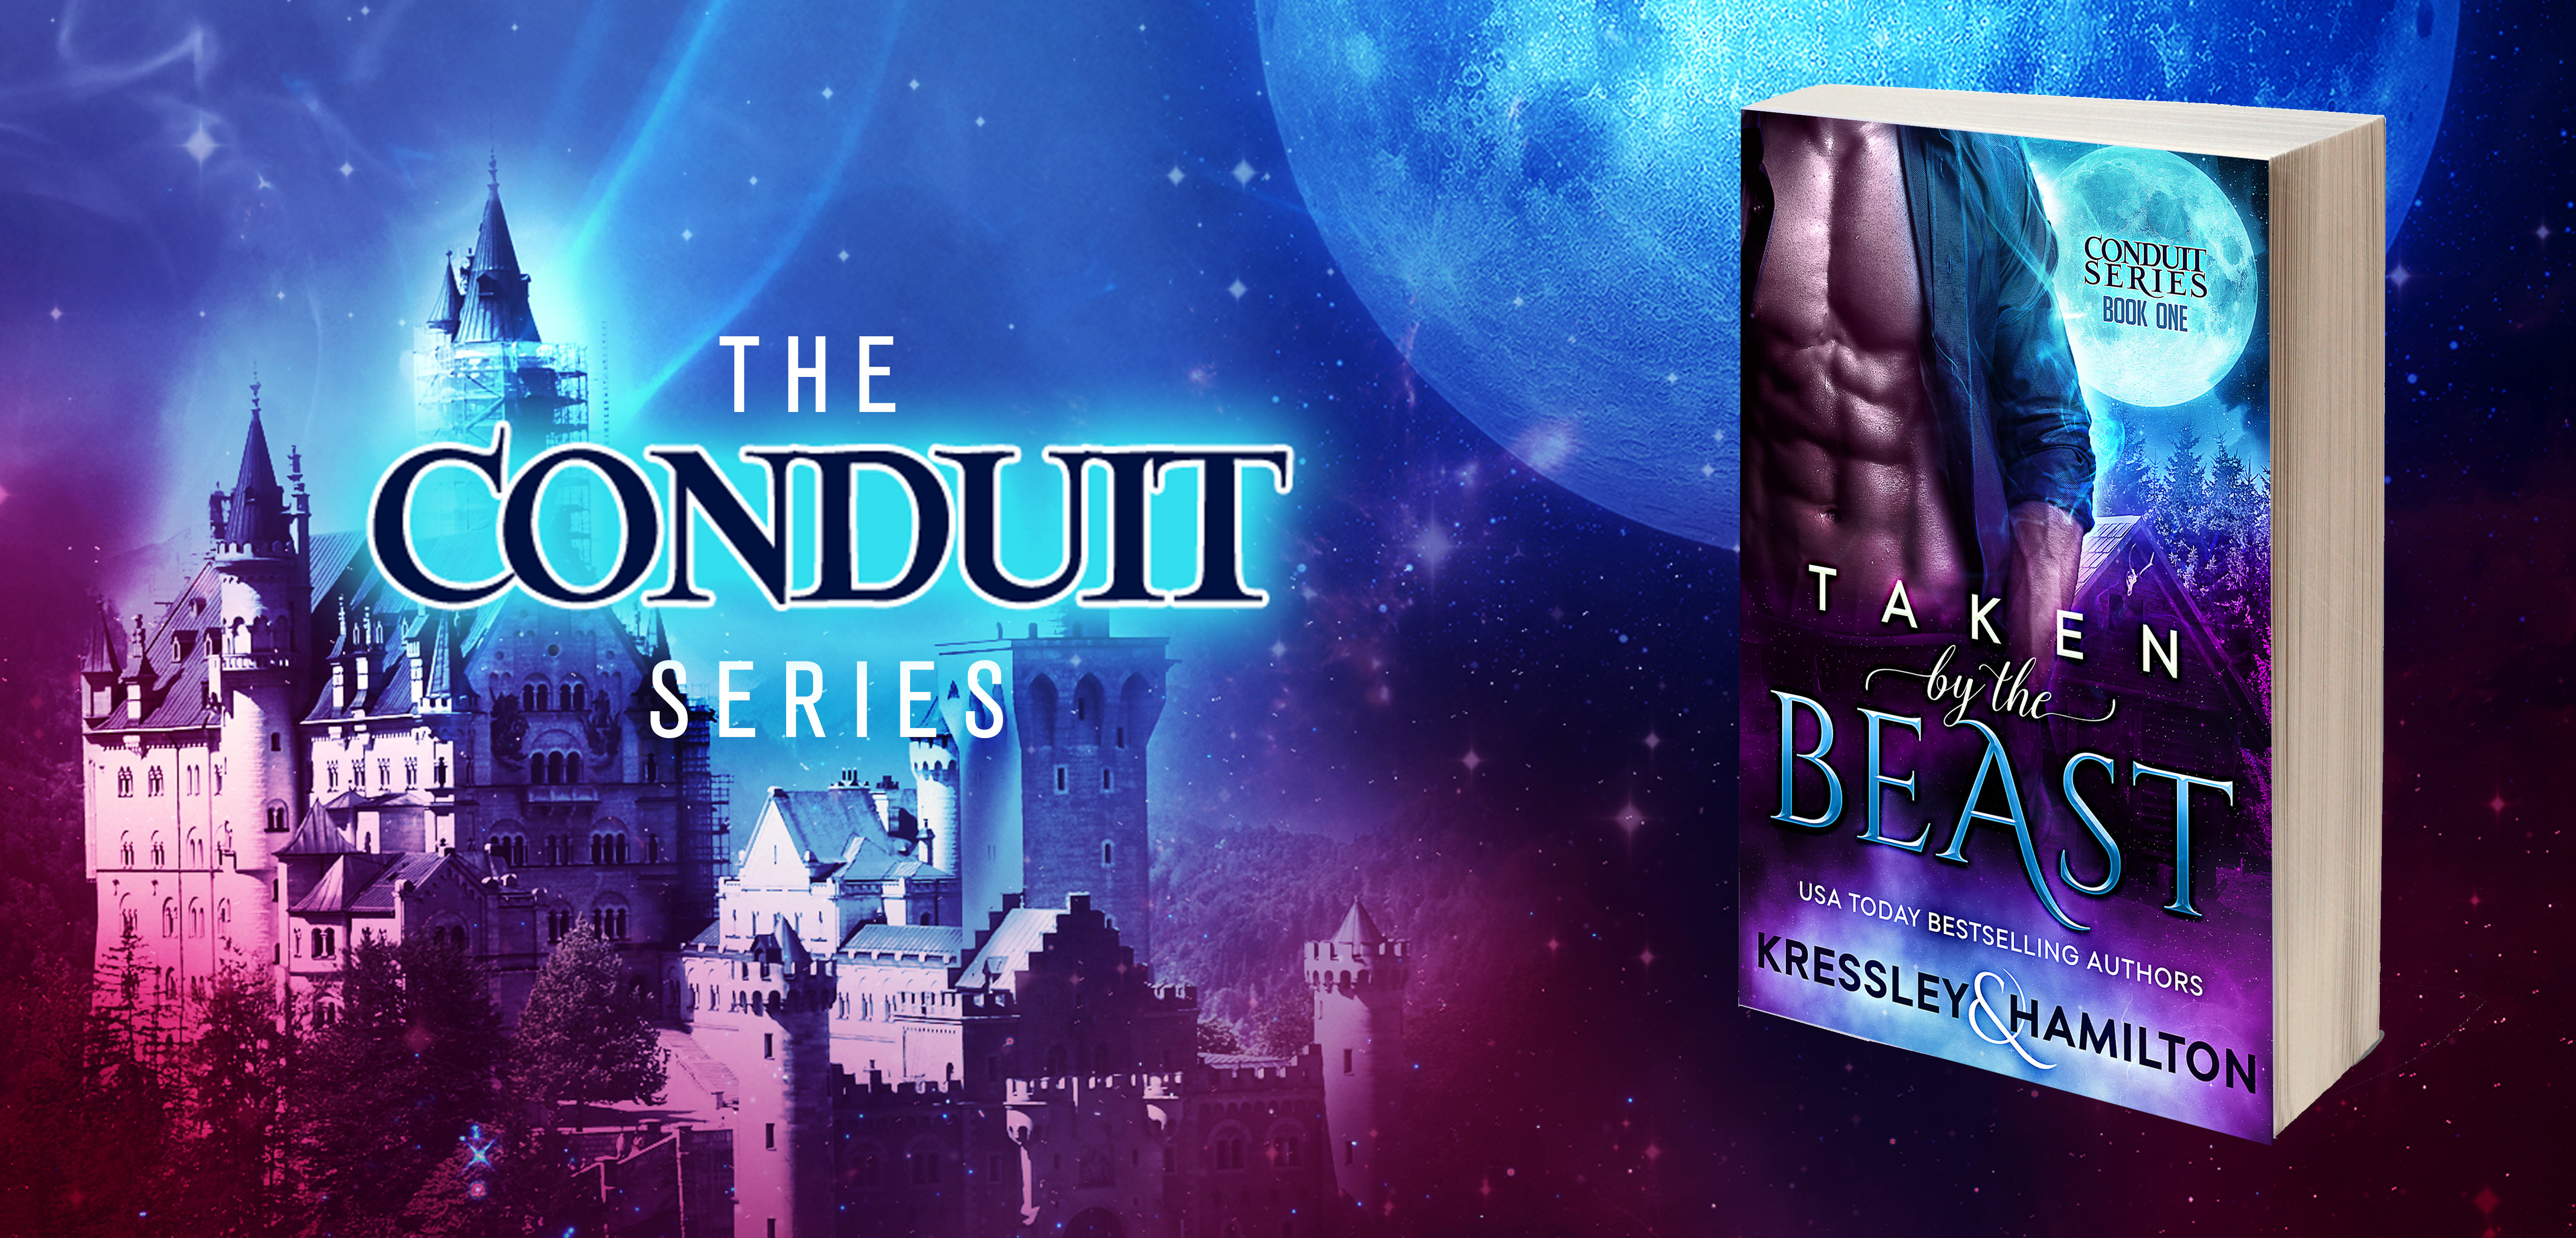 The Conduit Series by New York Times Bestselling Author Rebecca Hamilton